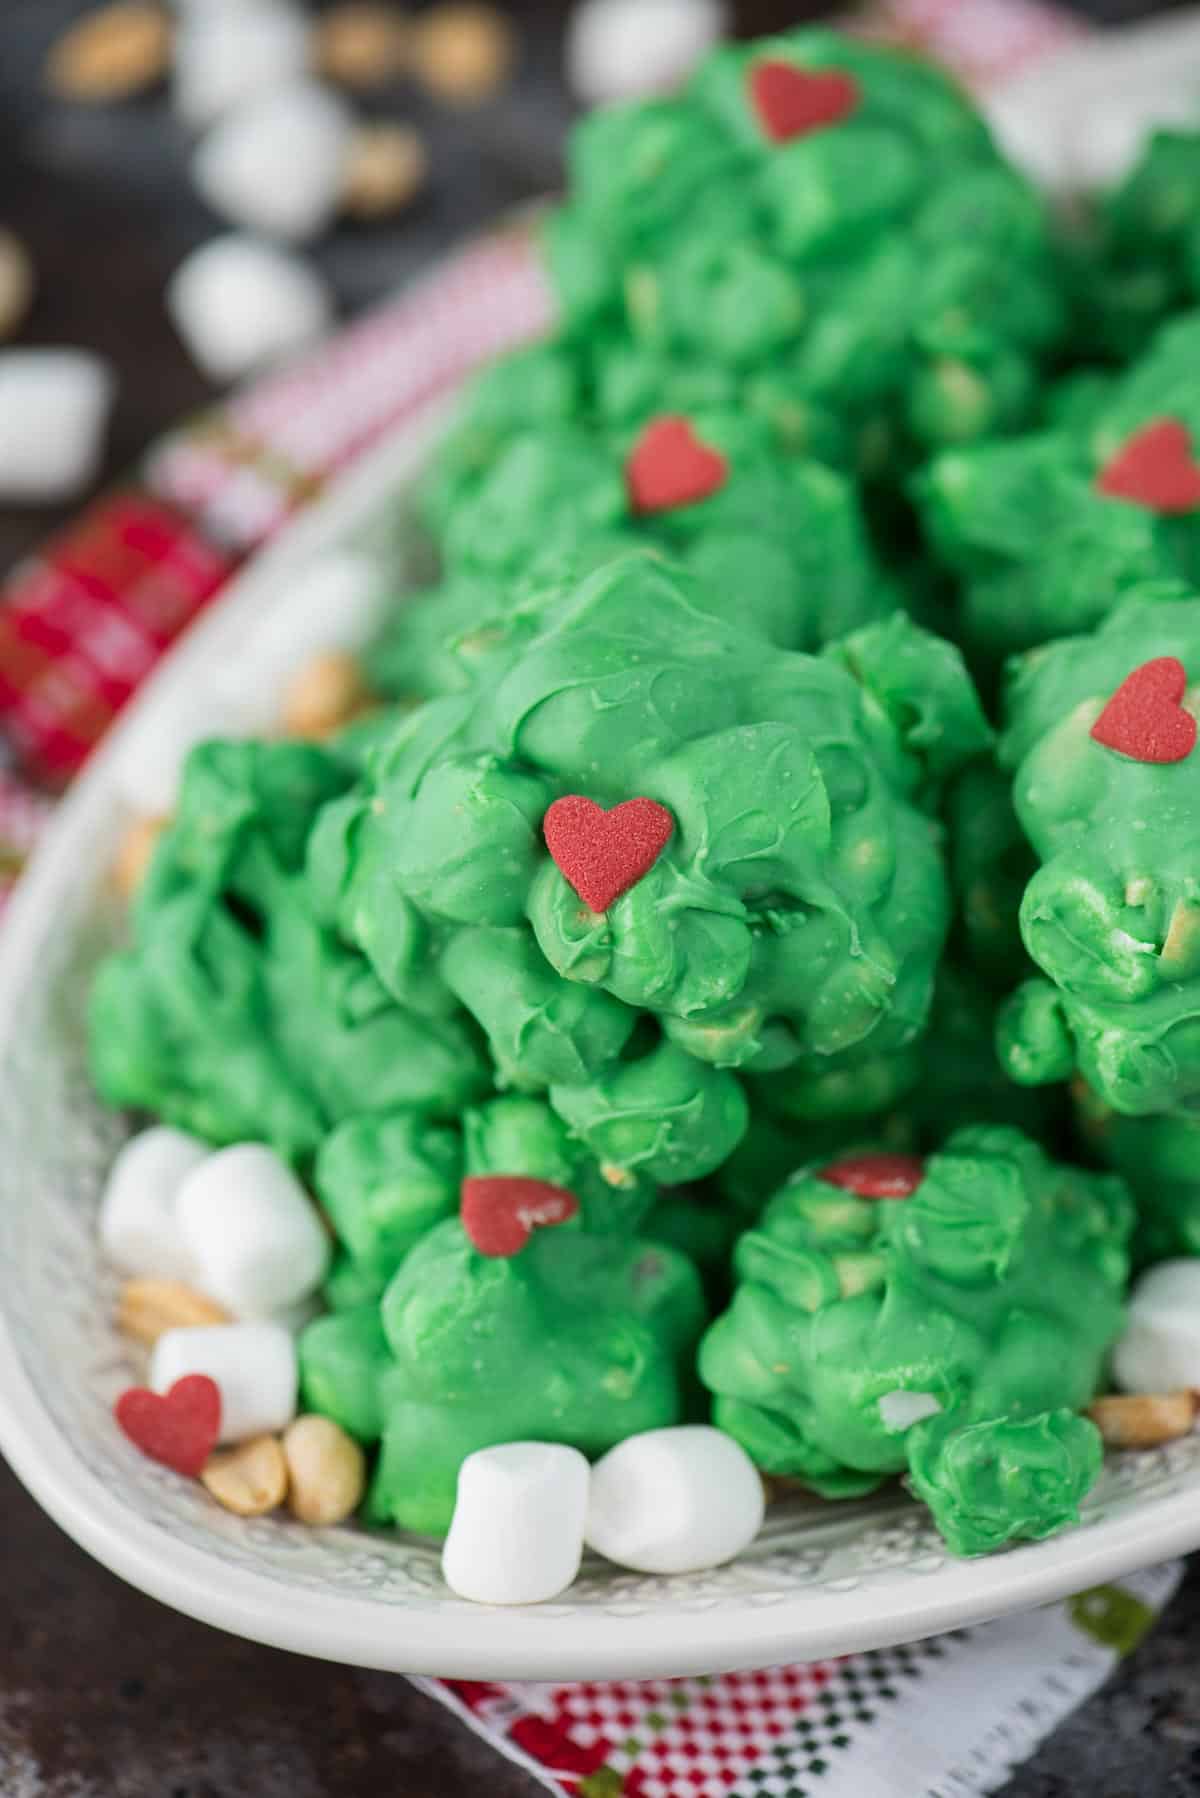 peanut marshmallow clusters coated in green chocolate with a red candy heart for grinch clusters!